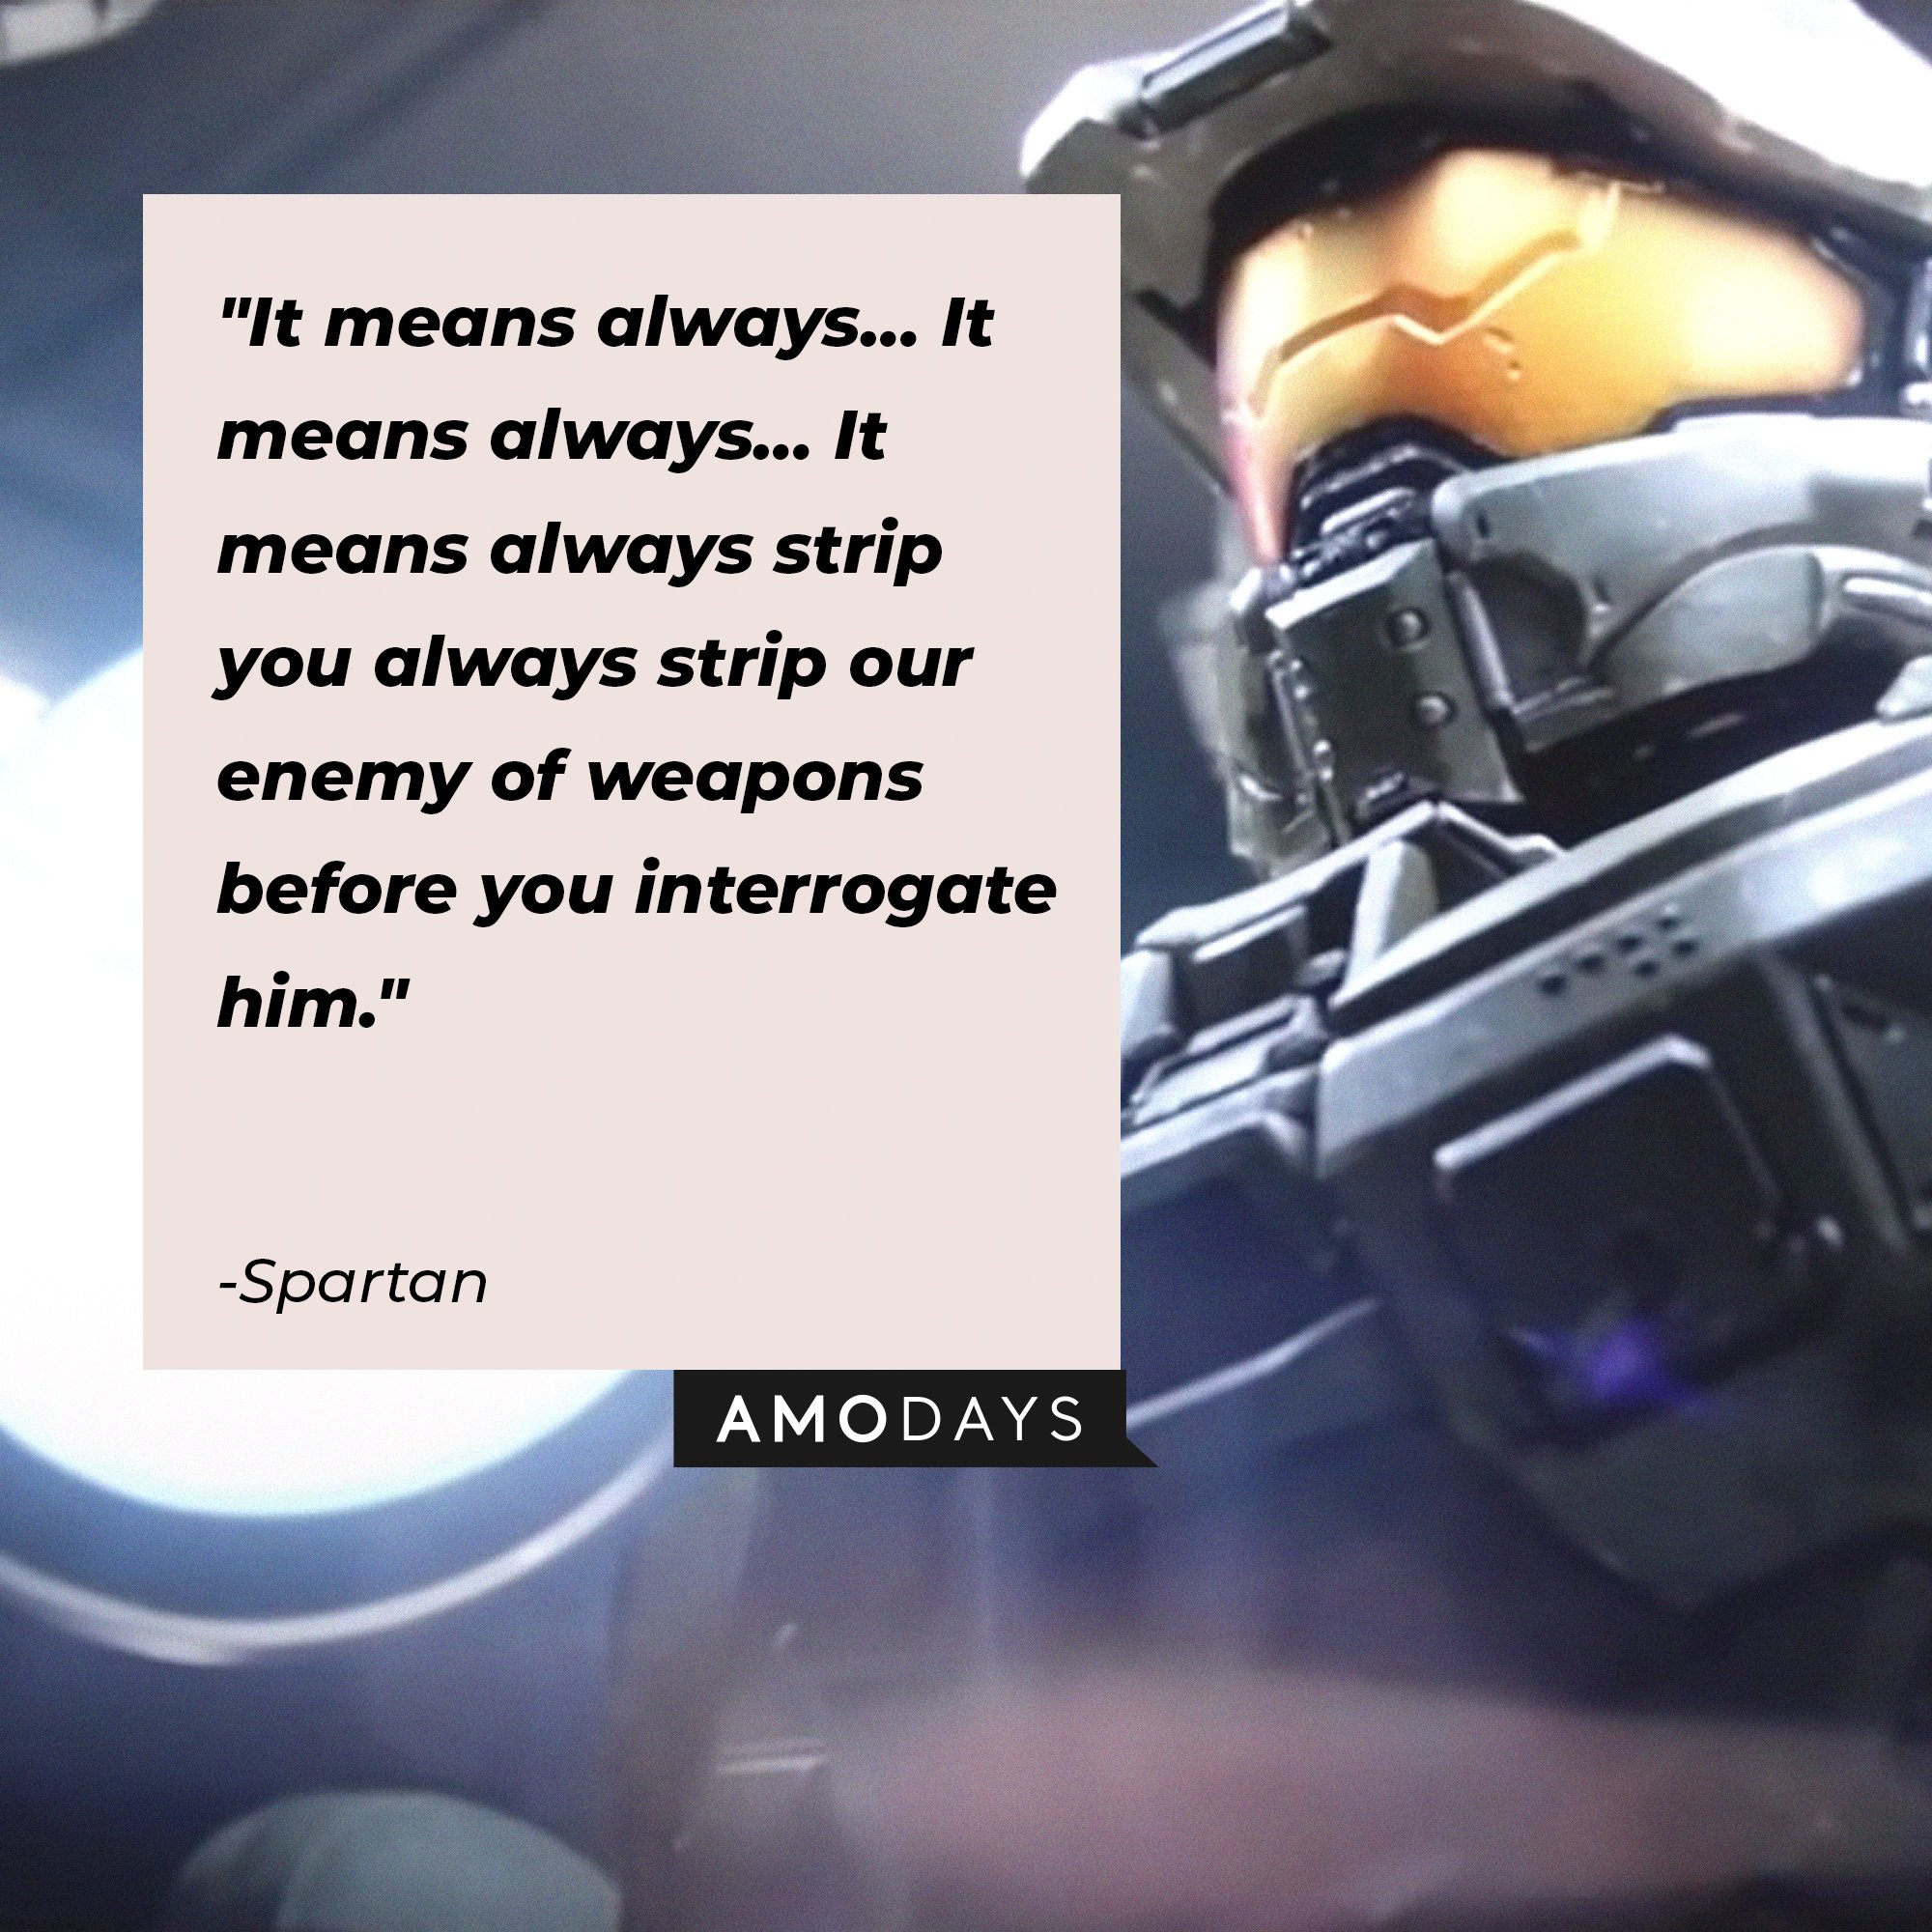 Spartan's quote: "It means always… It means always… It means always strip you always strip our enemy of weapons before you interrogate him." | Image: AmoDays